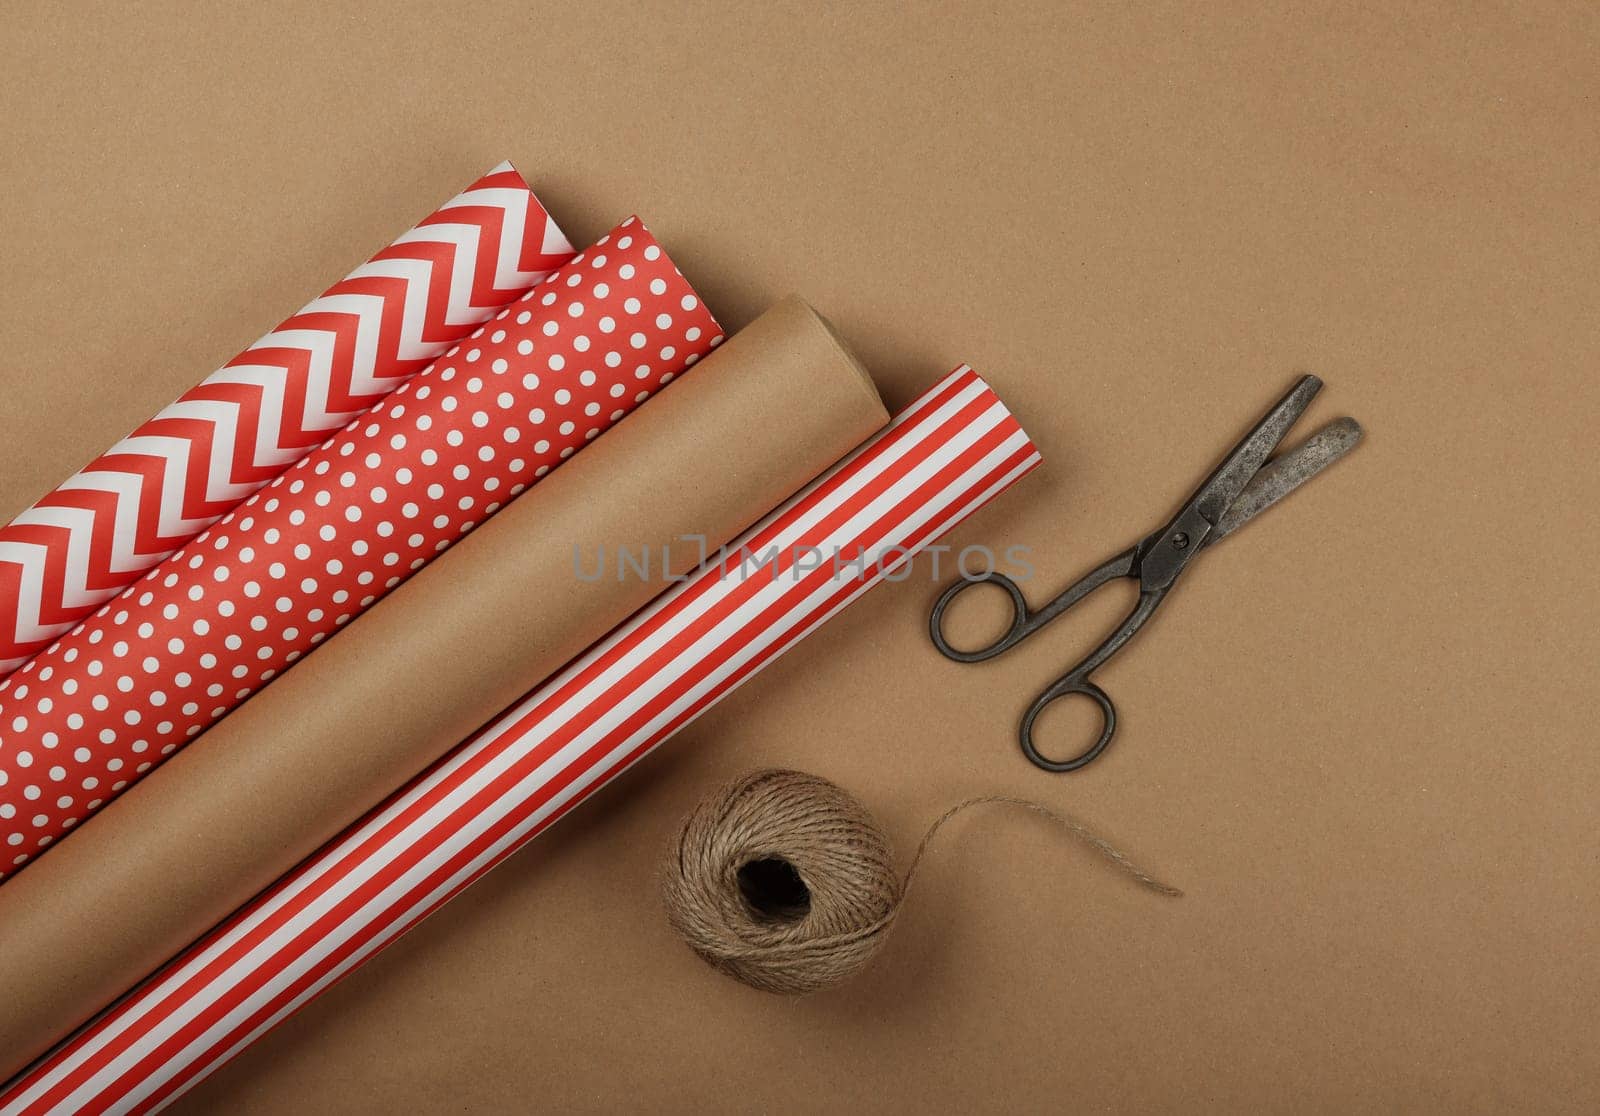 Packing Christmas gifts with red and brown paper by BreakingTheWalls